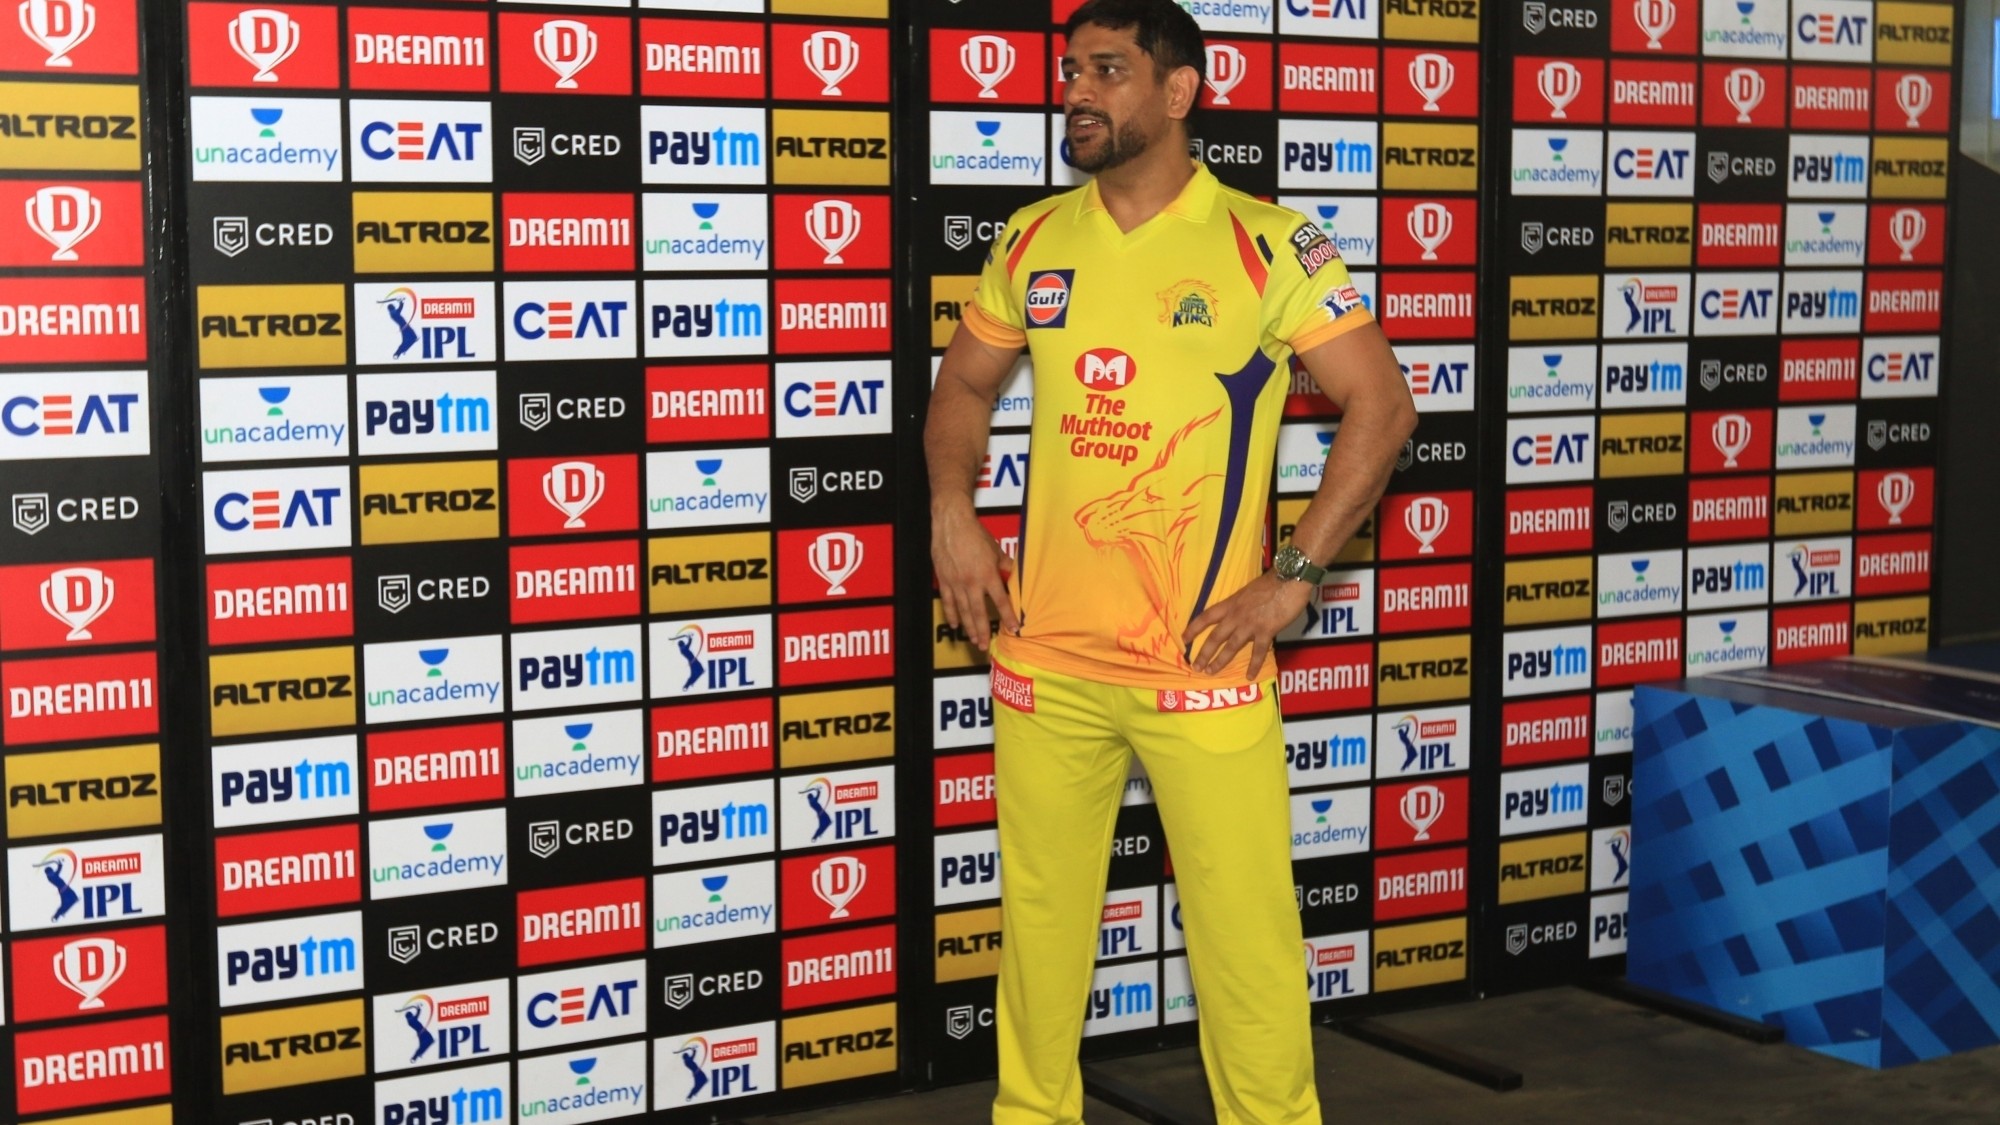 IPL 2020: WATCH - MS Dhoni thanks the support team who made IPL 13 possible amid pandemic 